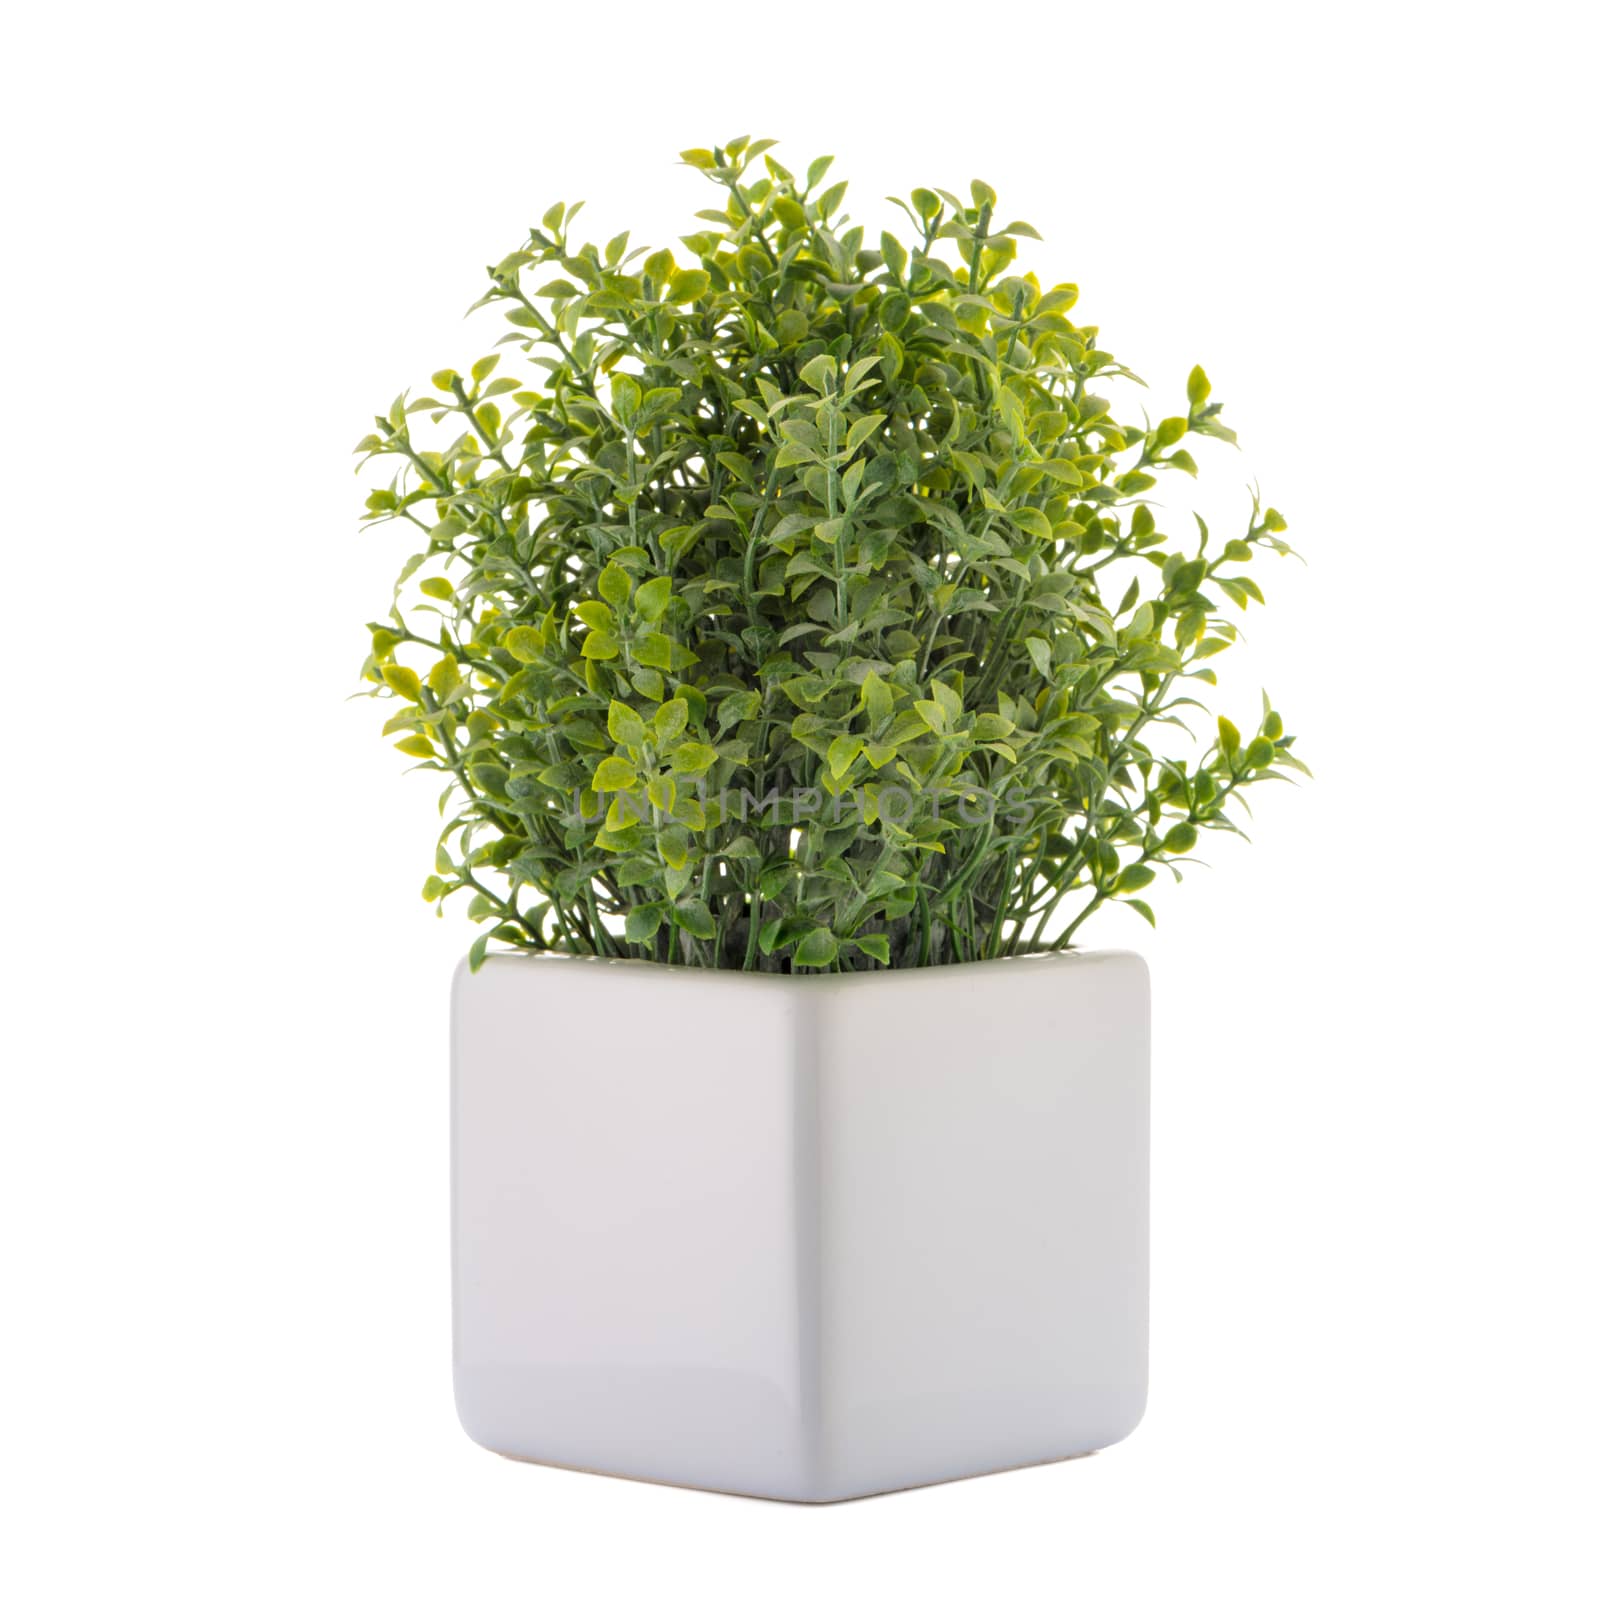 Small decorative plant in a ceramic vase isolated on white background.